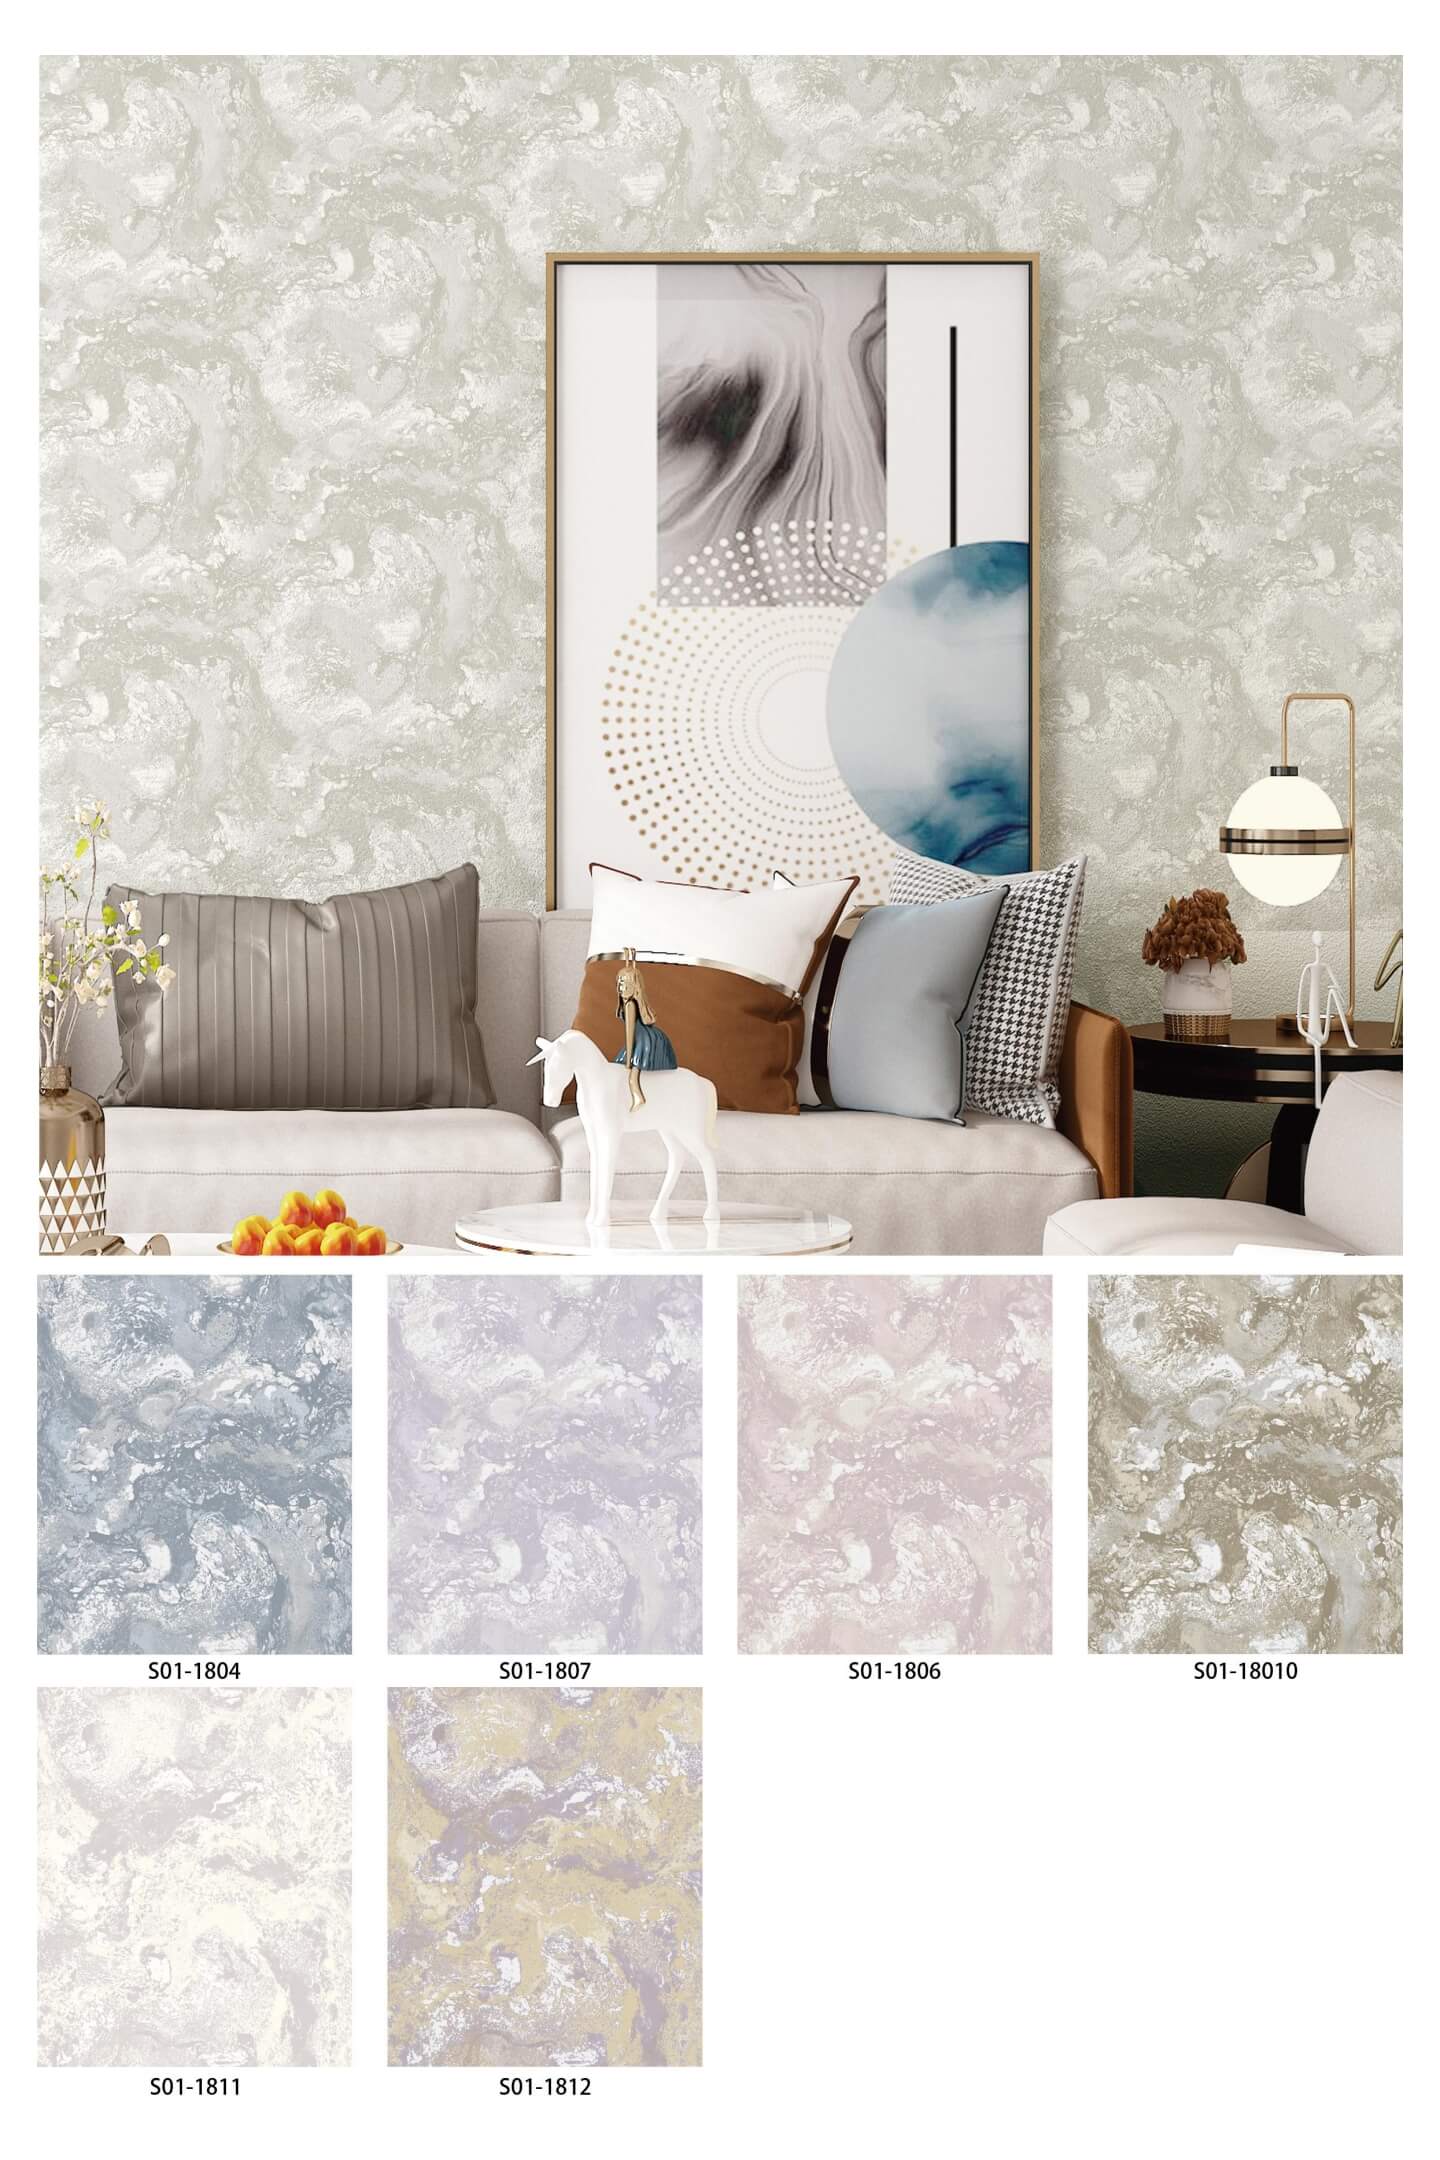 Floral Design Wallpapers Manufacture With High-Quality PVC Material Designer Premium Quality Water-resistant Wallpaper (19)